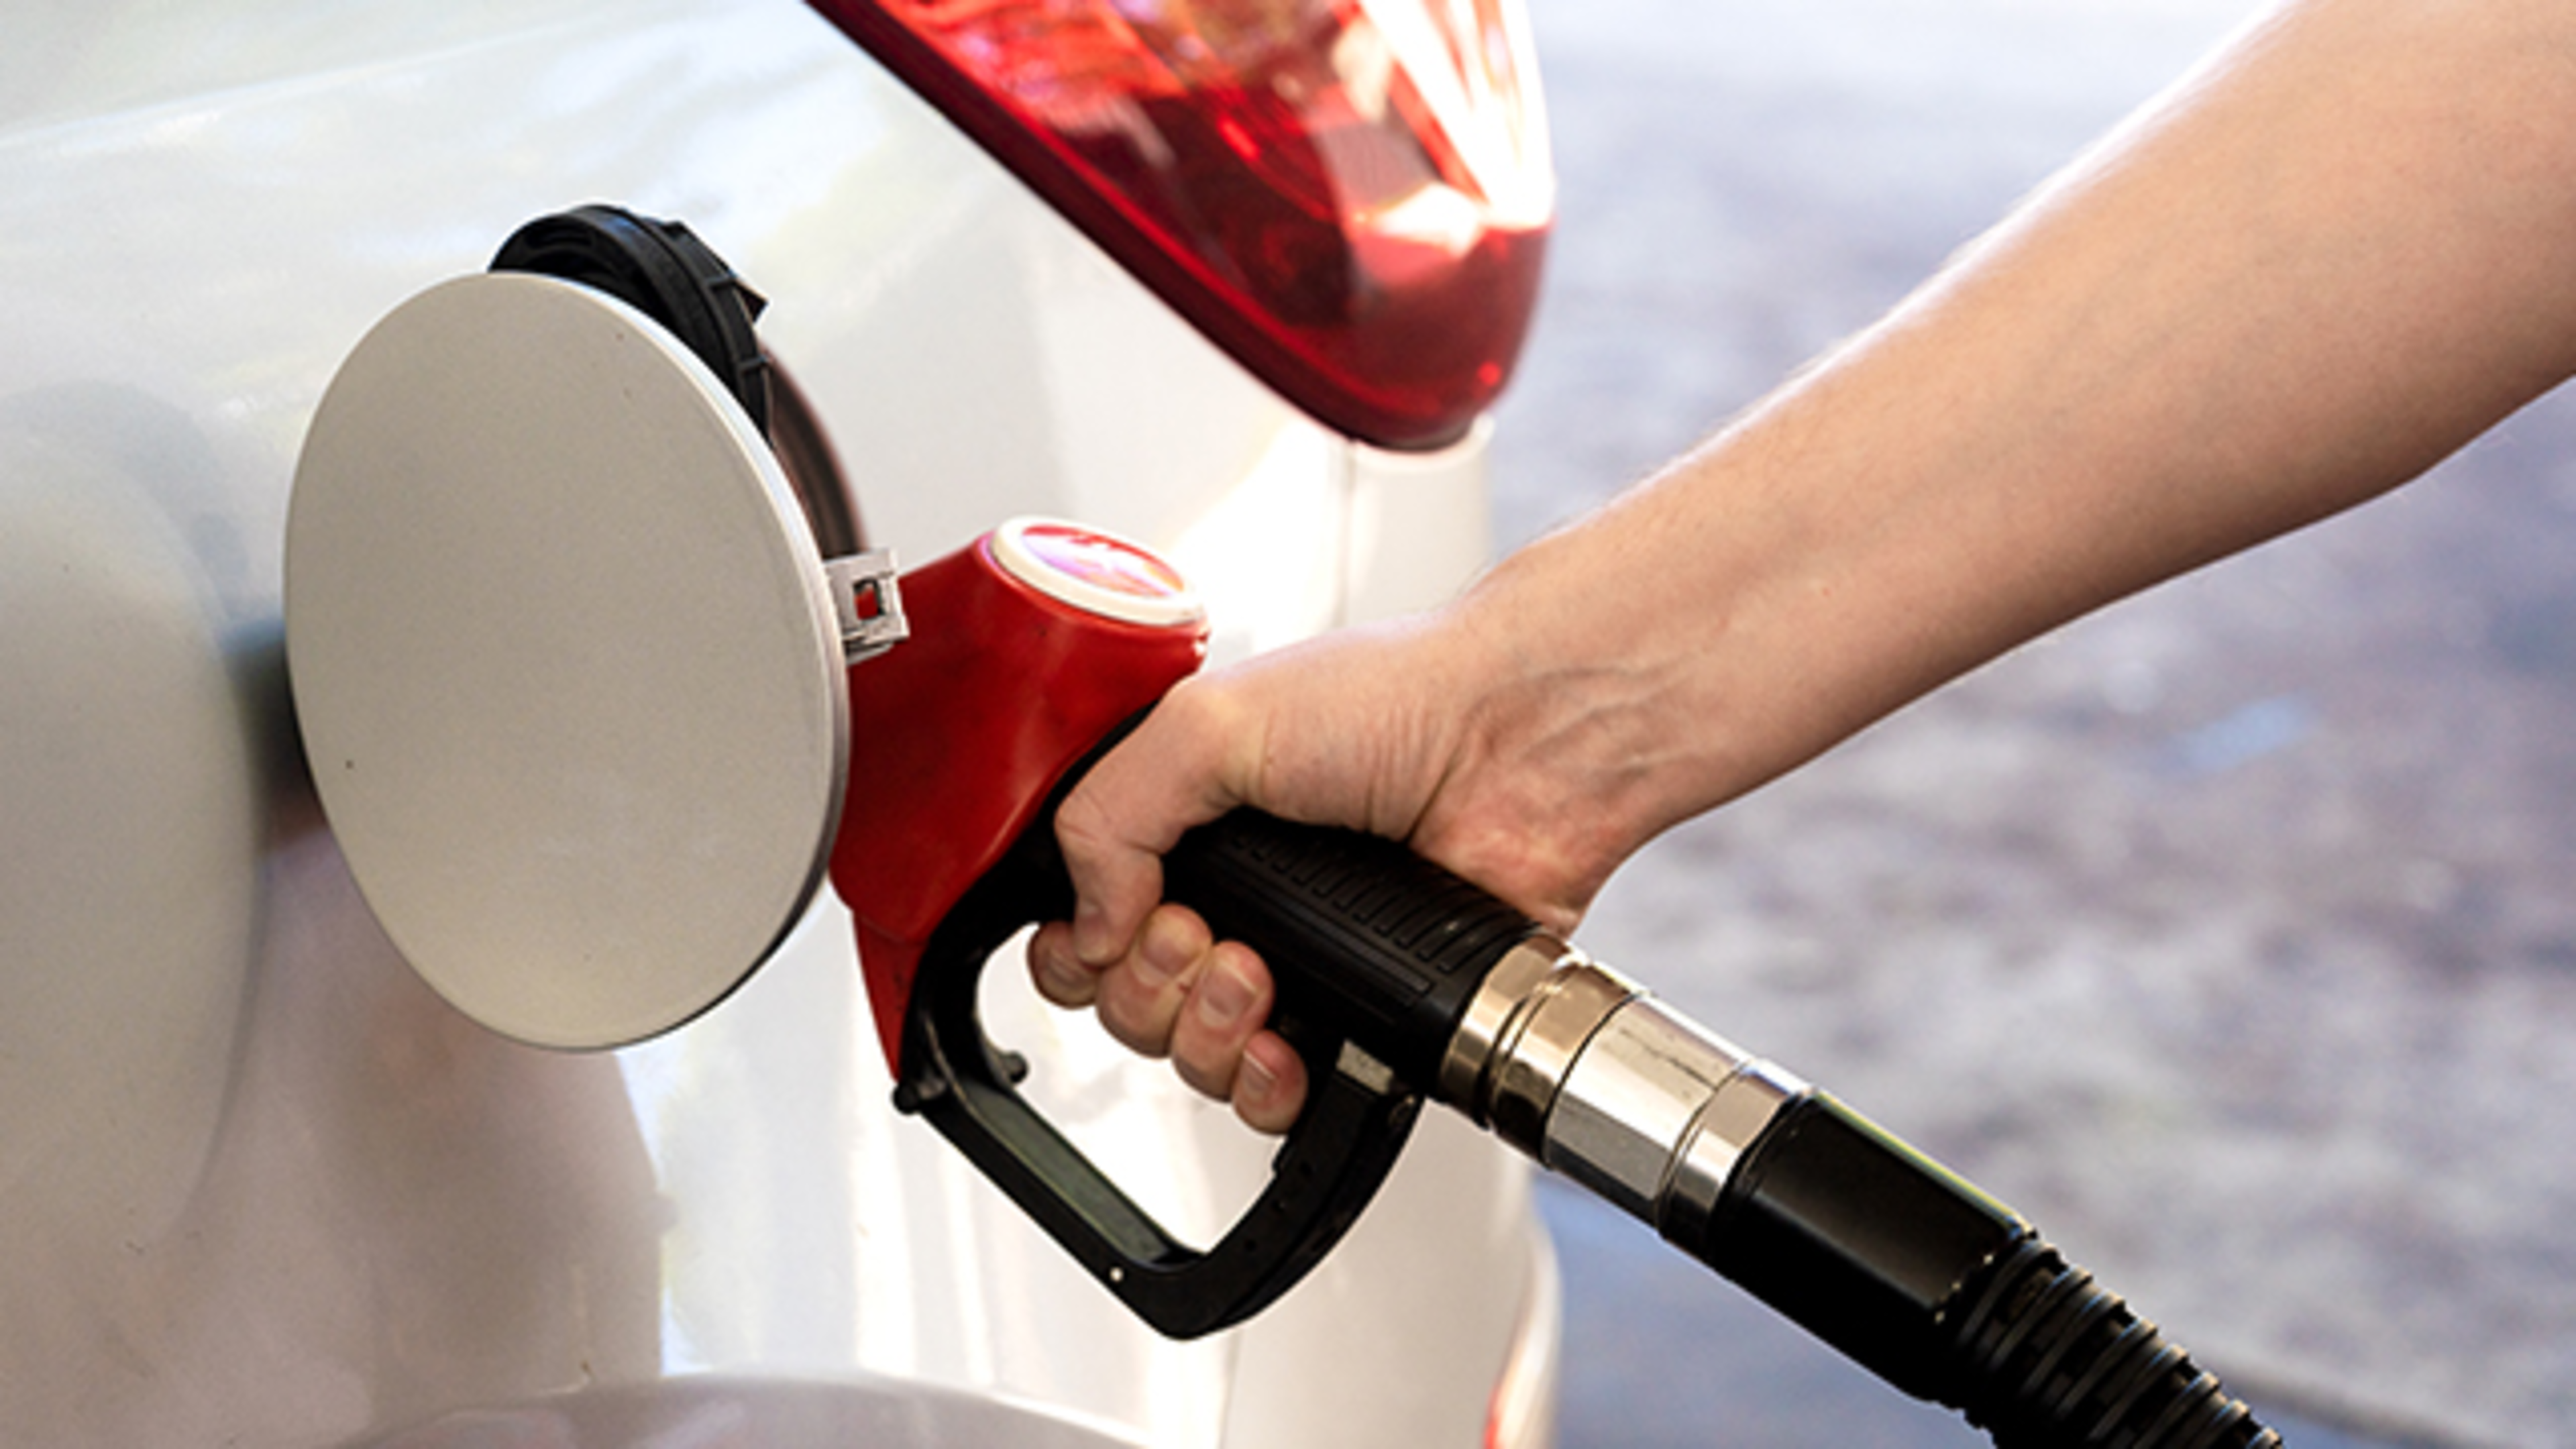 NRMA Urges Motorists to Capitalize on Falling Fuel Prices Ahead of Easter Road Trips featured image